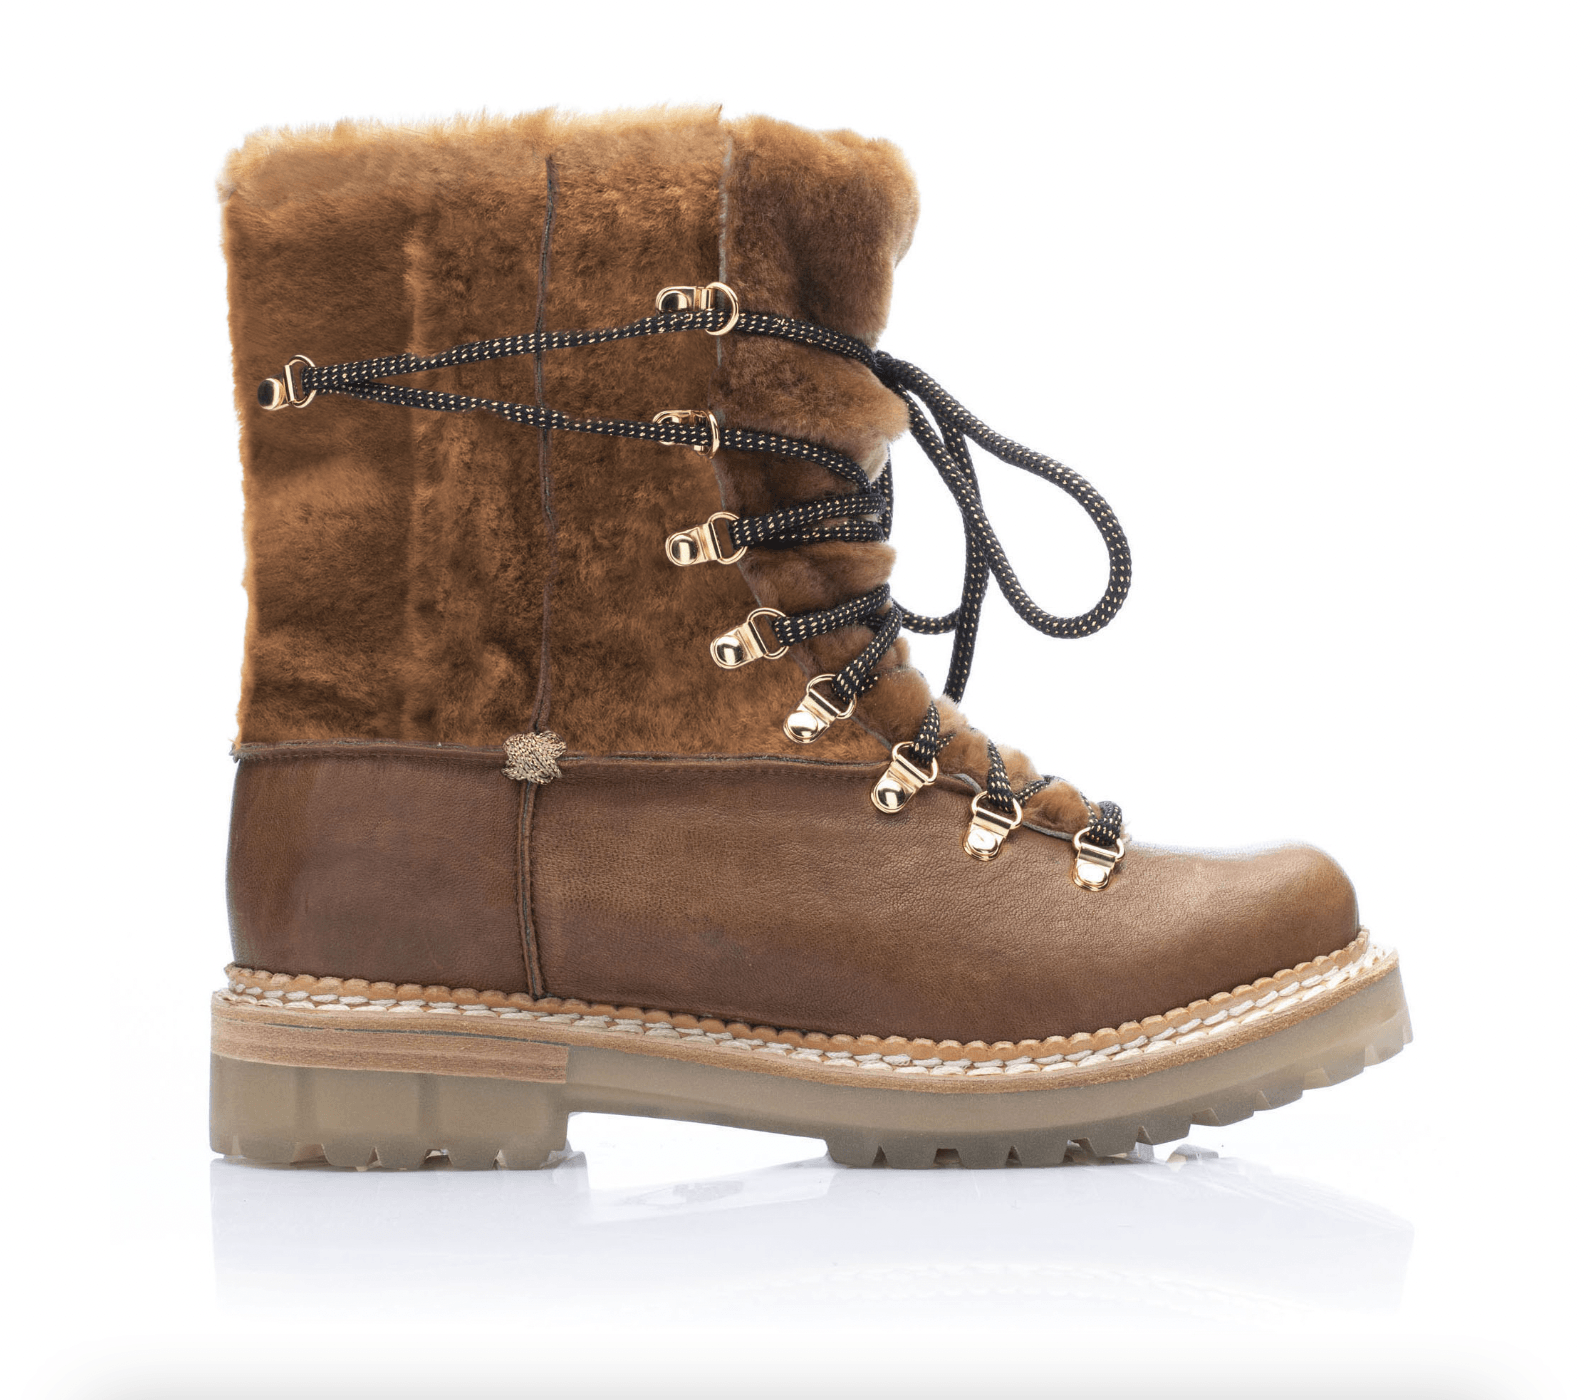 Giada Shearling Lined Boot by Montelliana - Haven